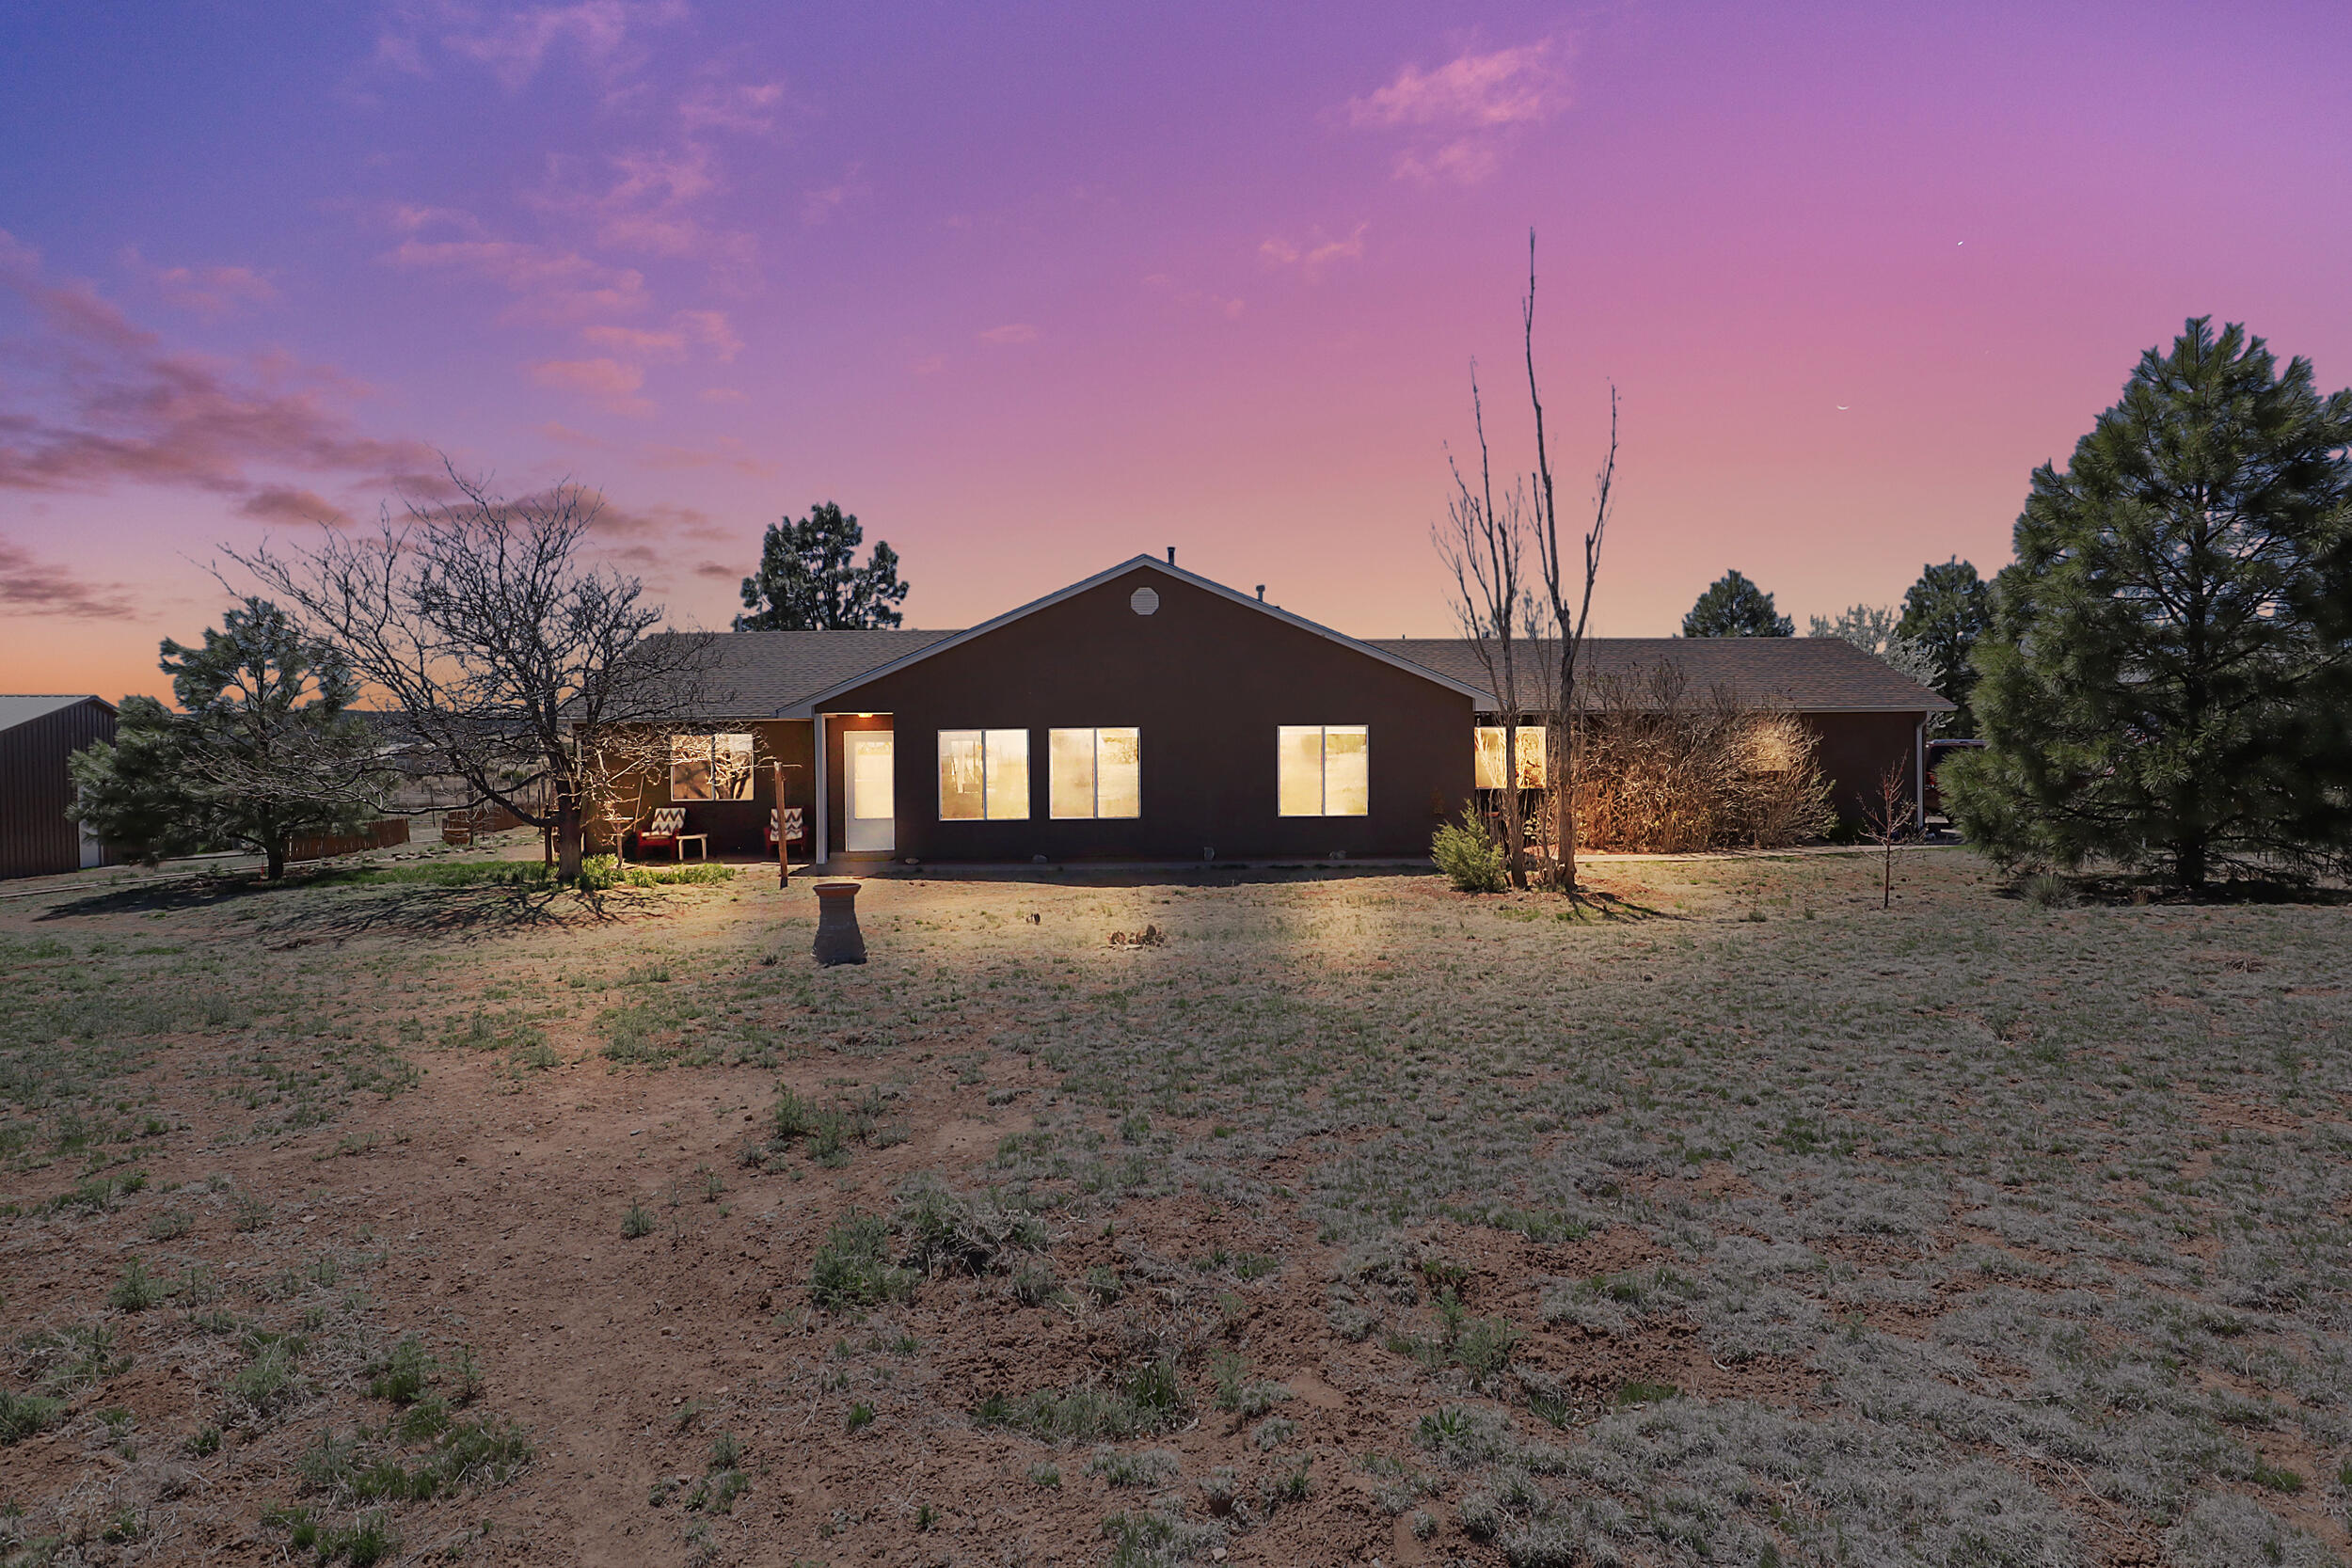 14 San Miguel Drive, Edgewood, New Mexico 87015, 4 Bedrooms Bedrooms, ,2 BathroomsBathrooms,Residential,For Sale,14 San Miguel Drive,1061177